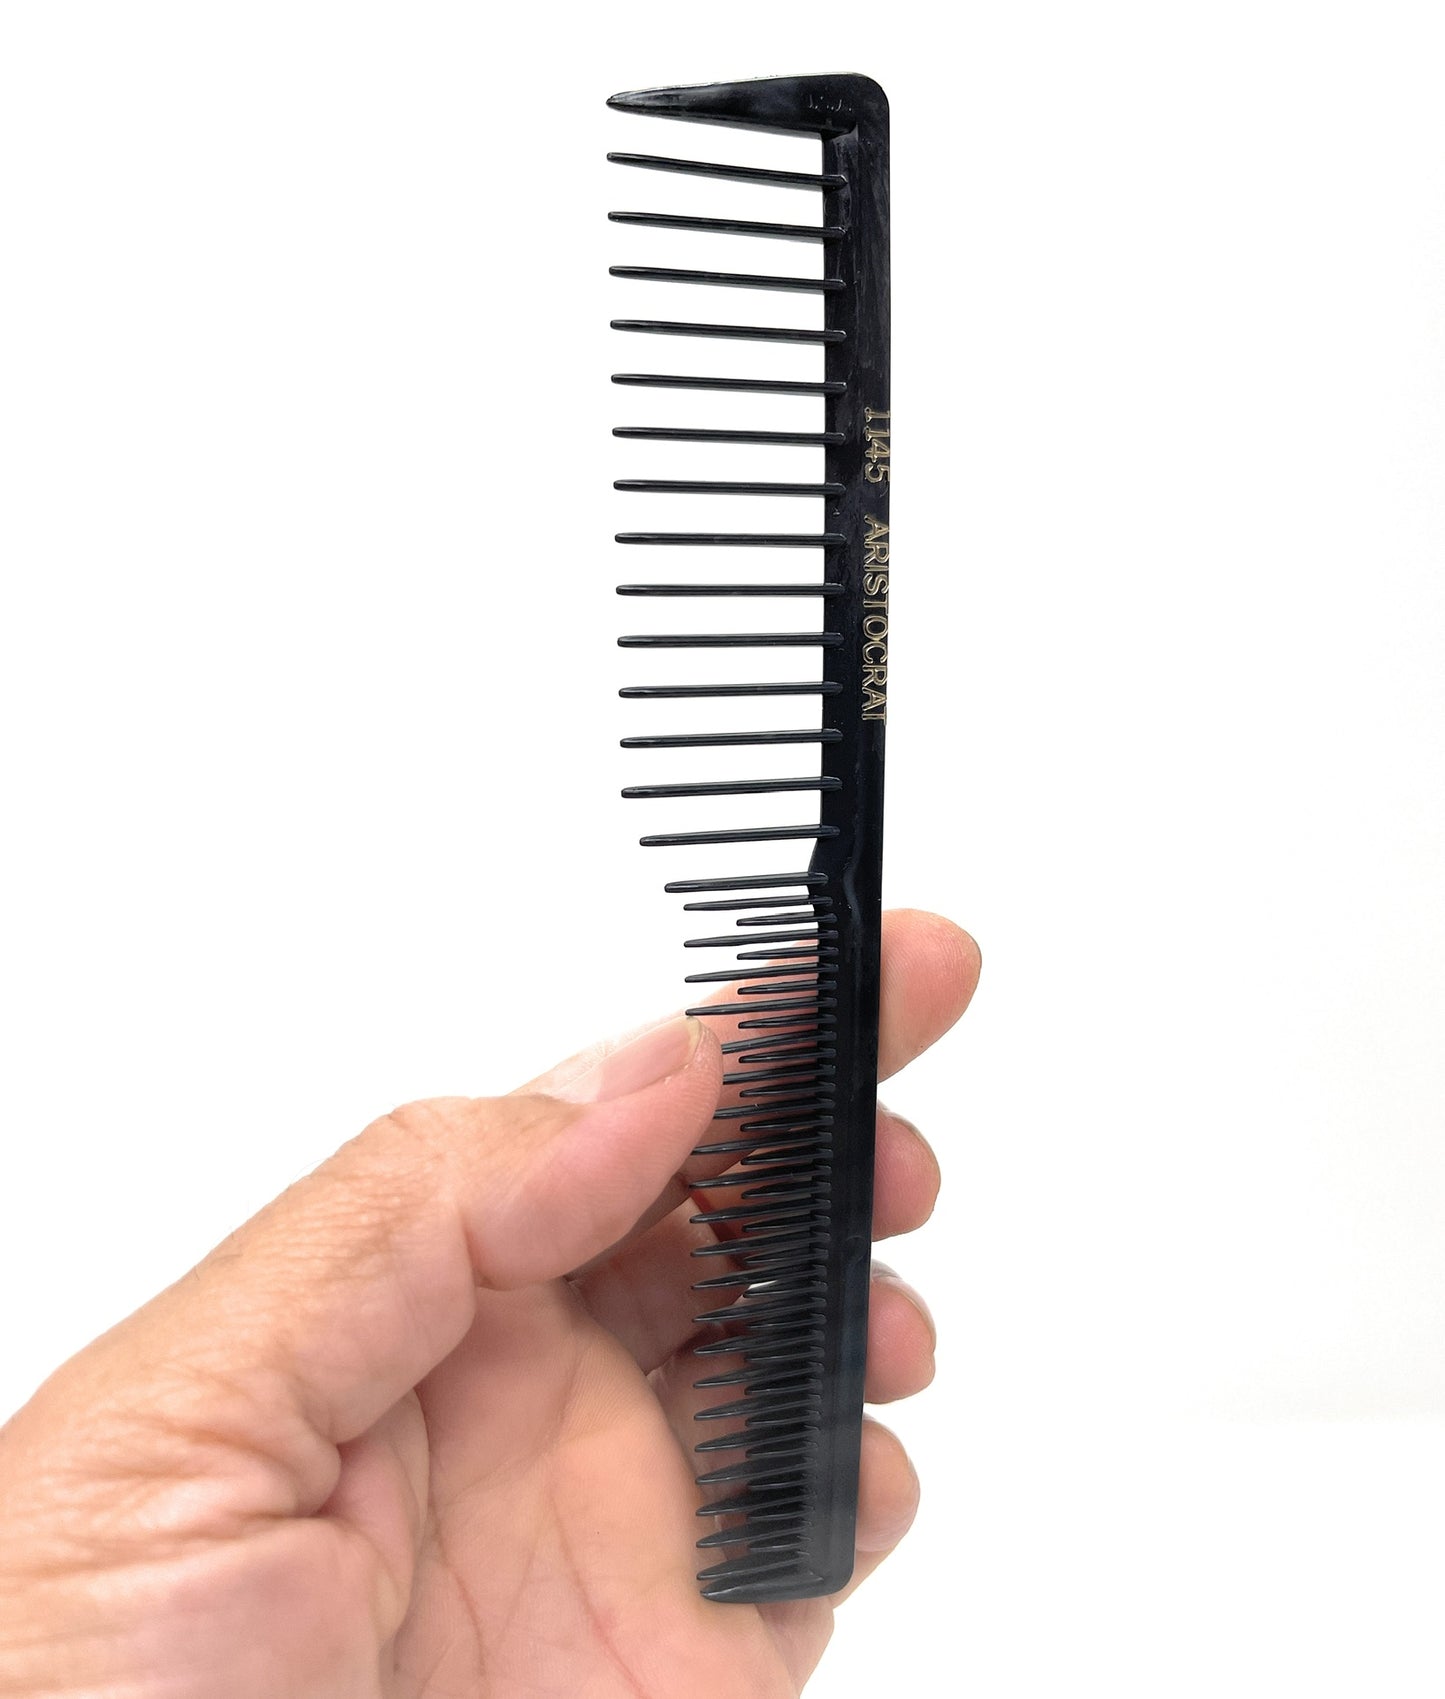 Aristocrat 1145 space tease combs Wide Tooth Teasing Lift Vented Hair Combs Space Tooth Barber Stylist Curly Hair Made In The USA  black  12 Pcs.